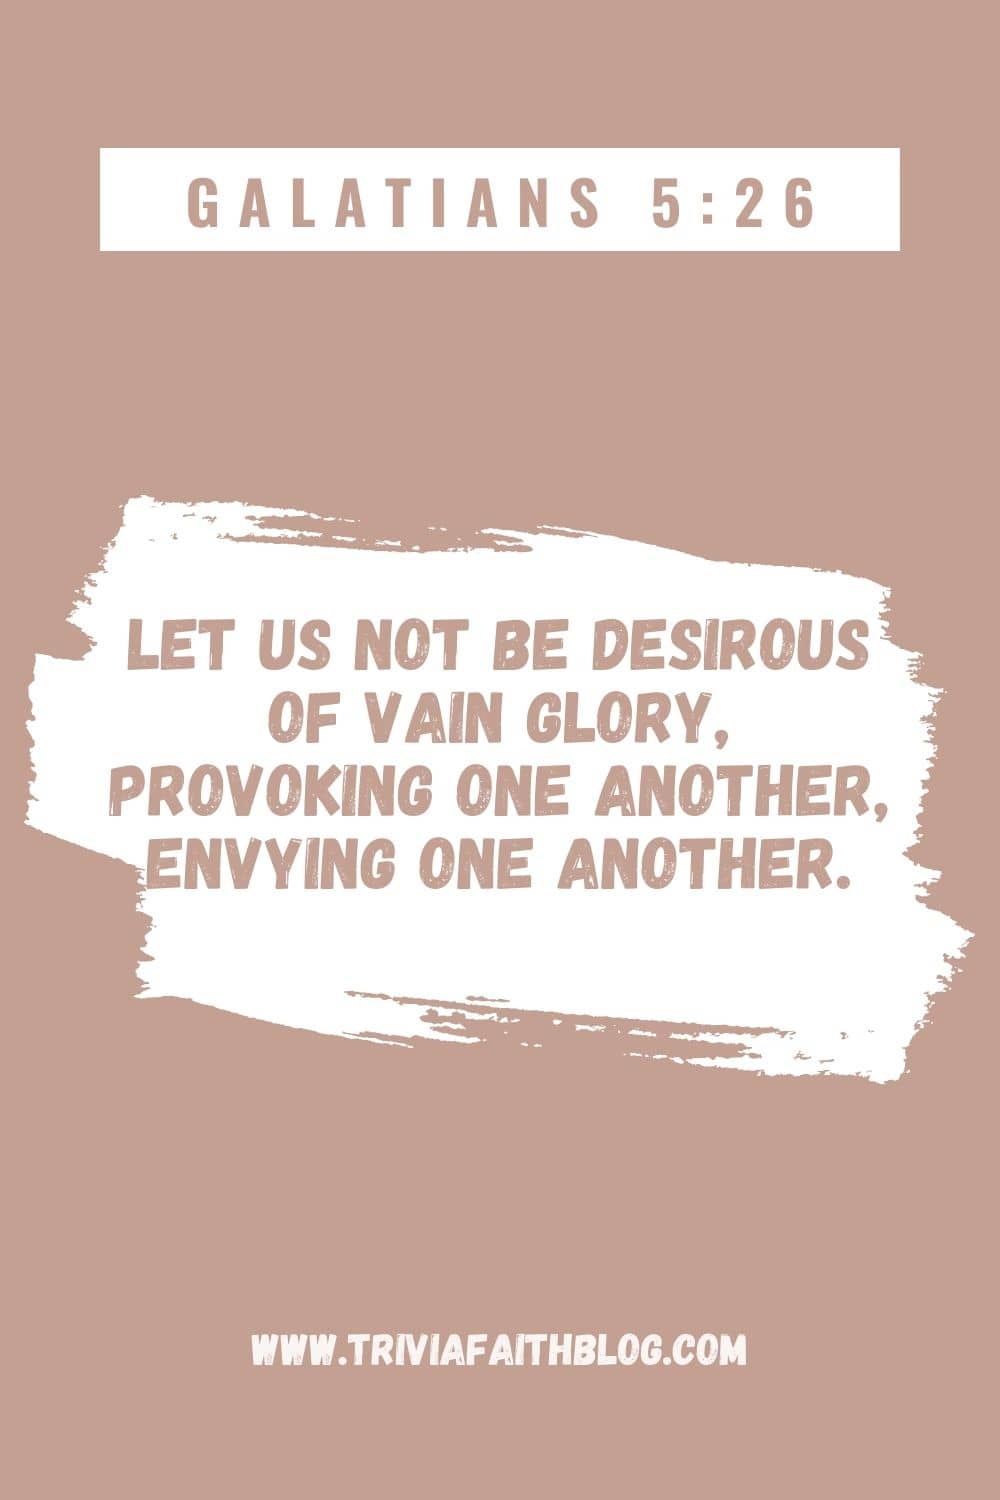 Let us not be desirous of vain glory, provoking one another, envying one another